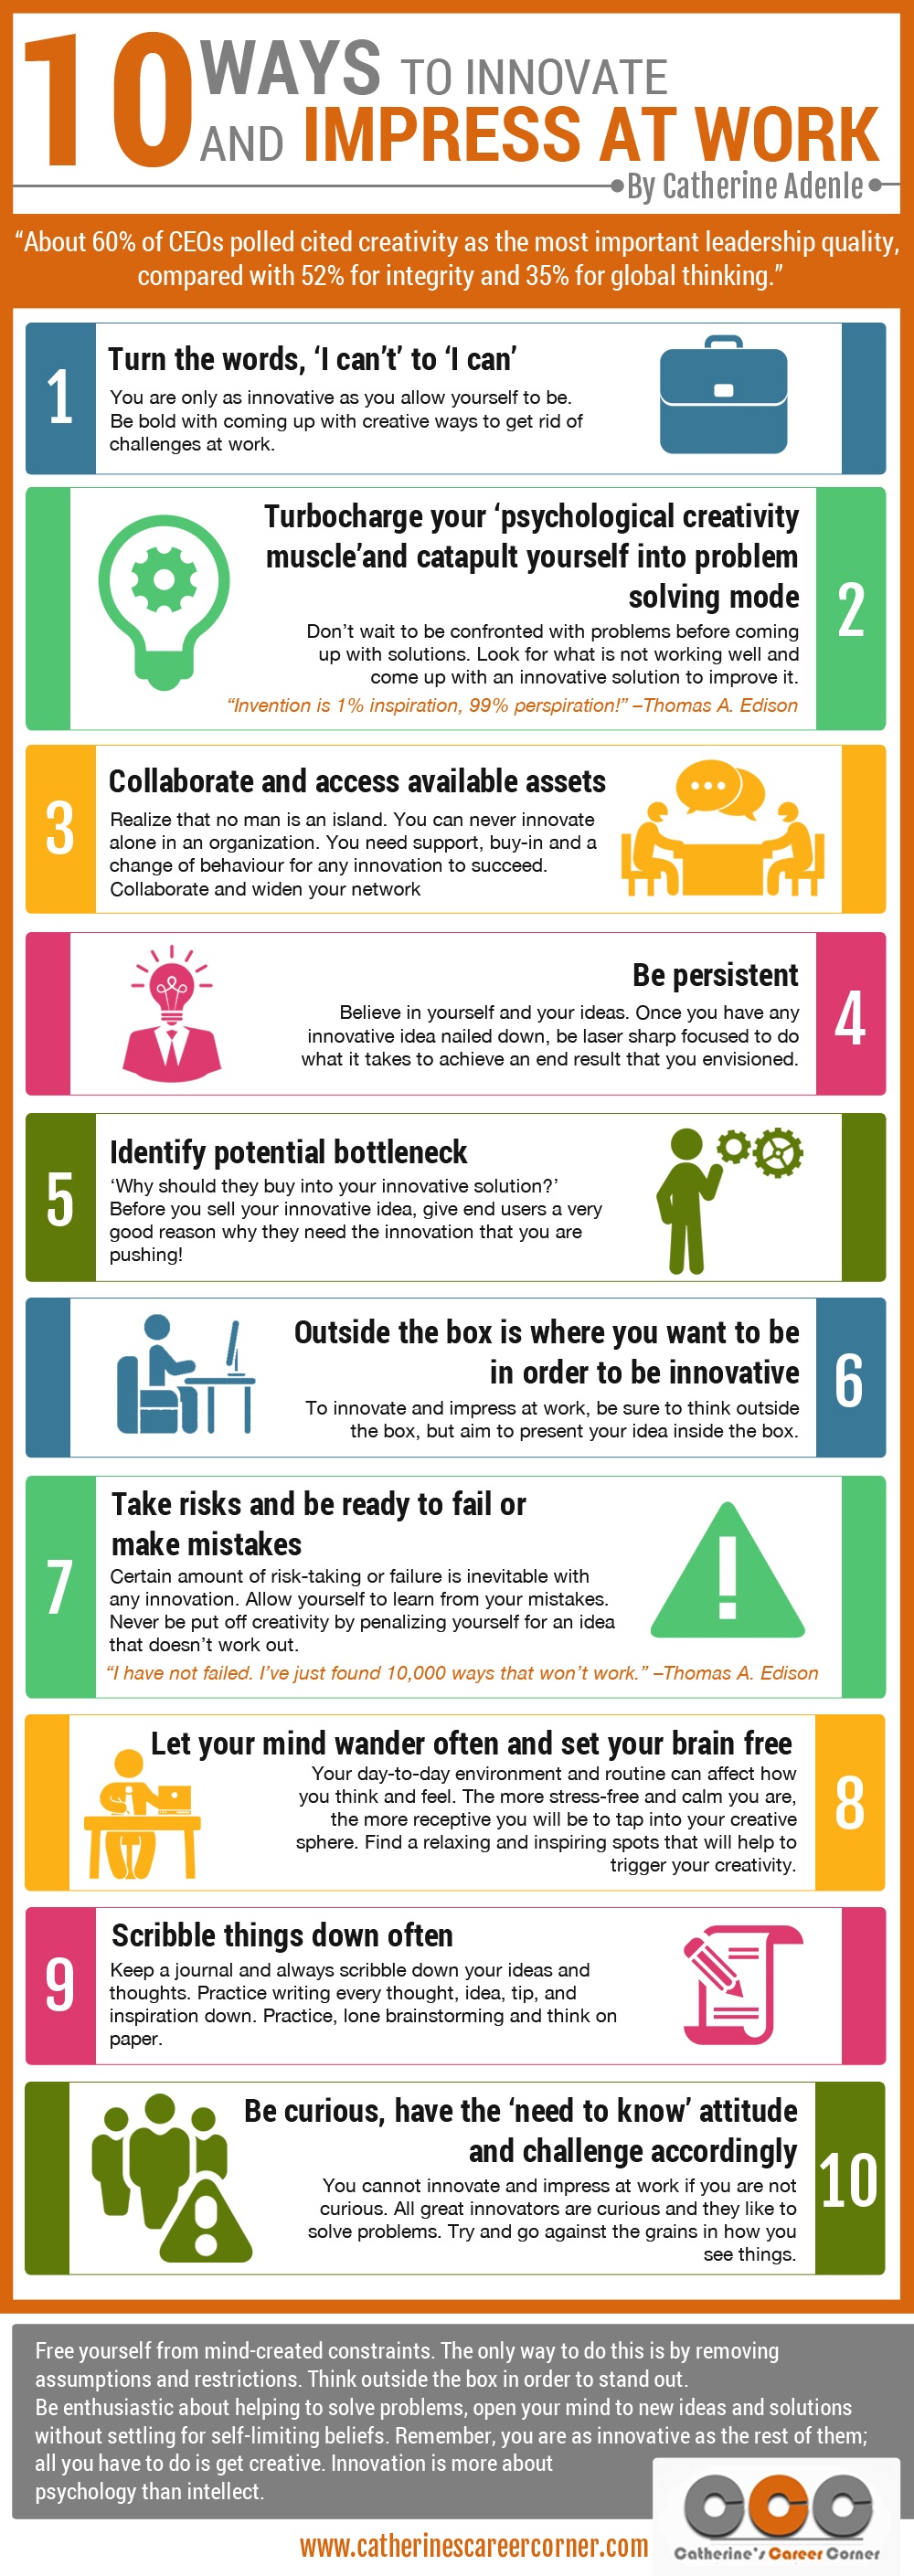 10 Ways To Innovate and Impress at Work (Infographic)